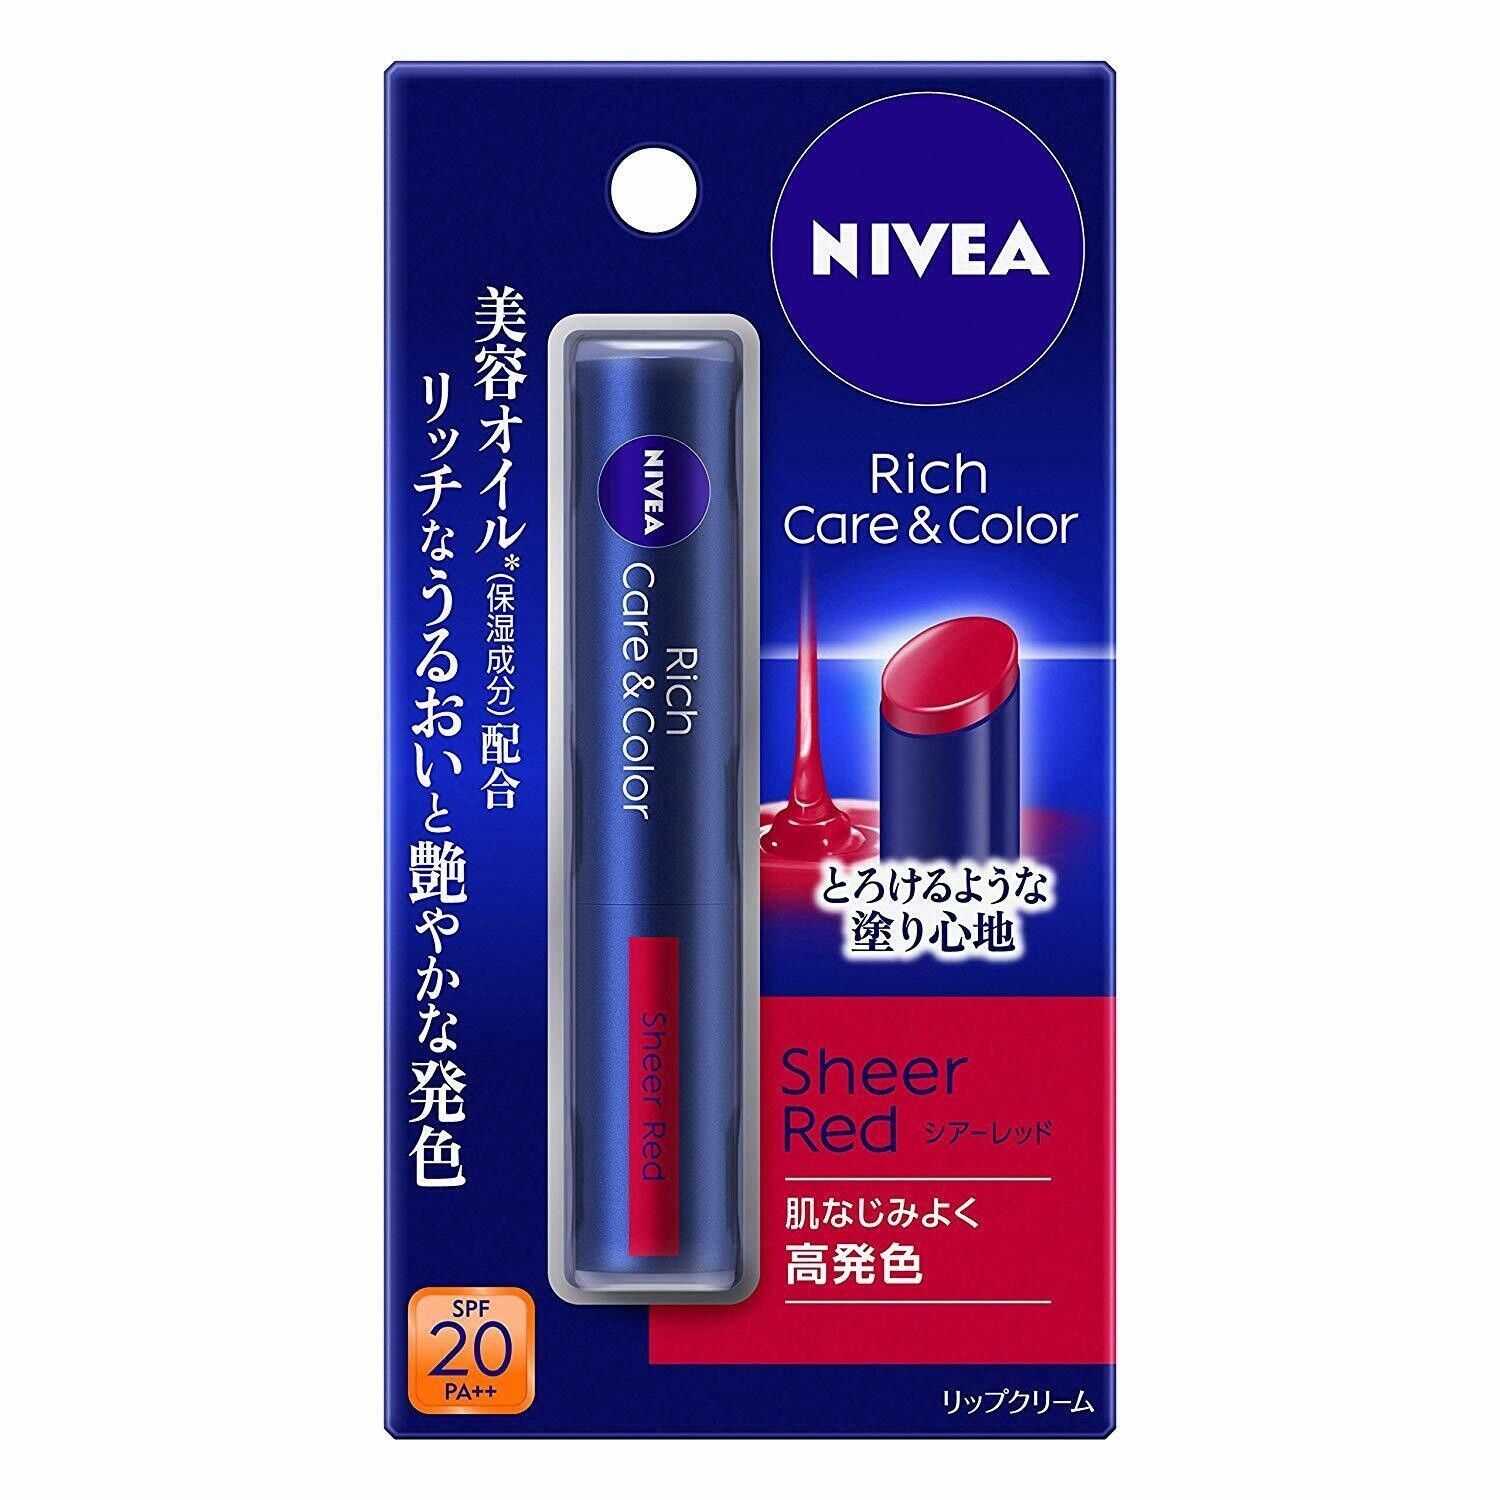 NiveaRich Care &amp; Color, Color: Sheer red